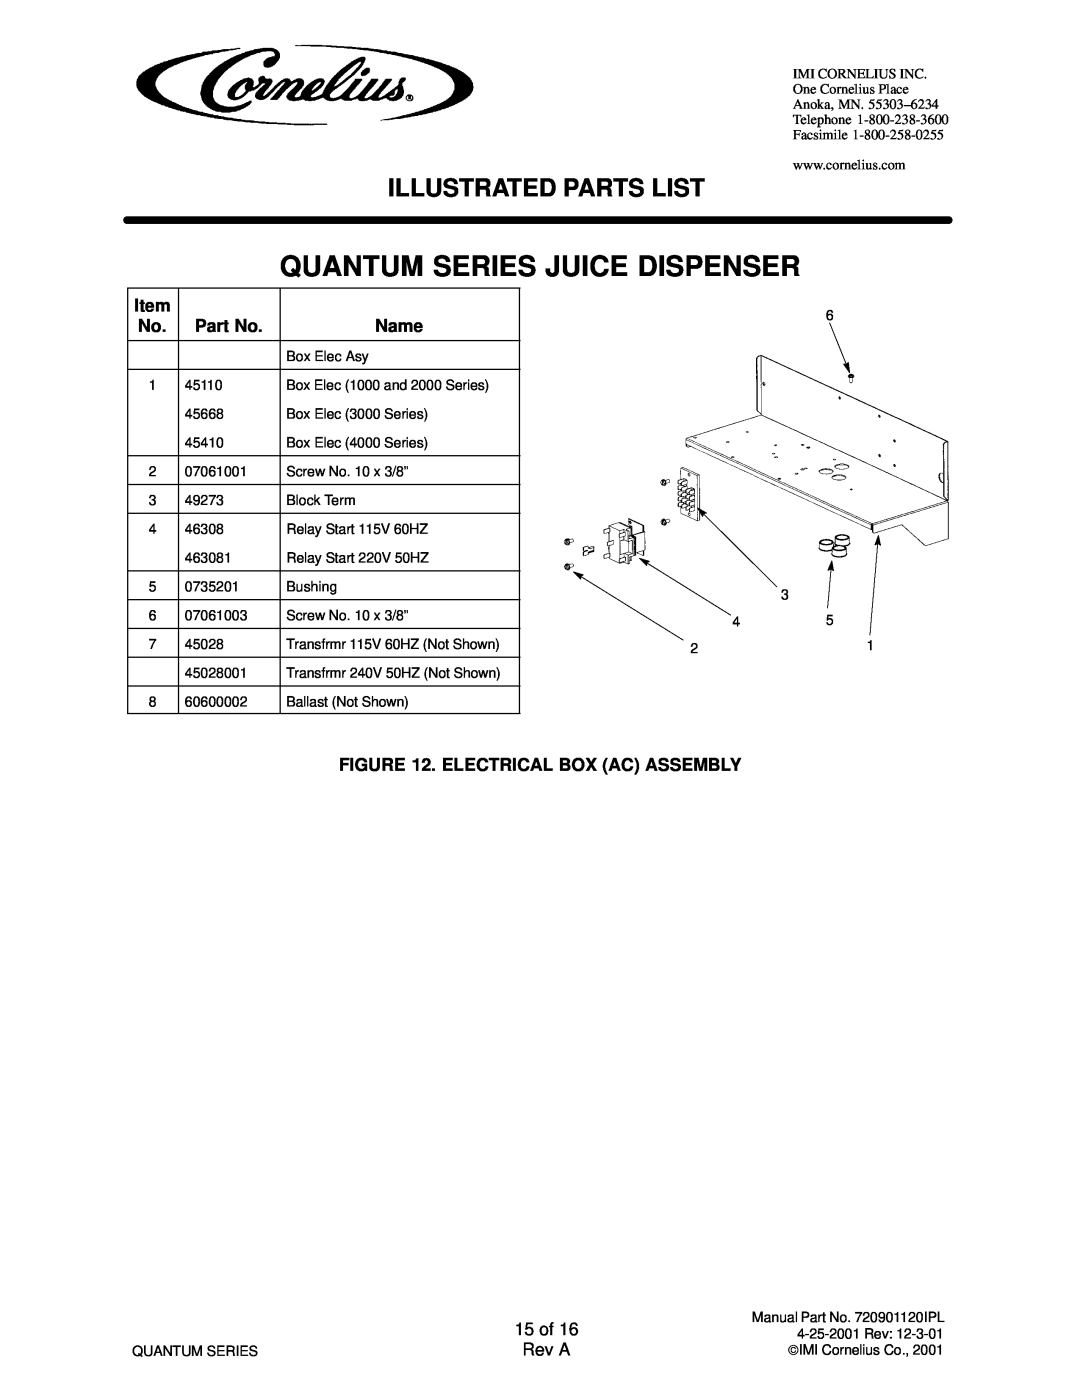 Panasonic 45200101 Quantum Series Juice Dispenser, Illustrated Parts List, Name, Electrical Box Ac Assembly, 15 of, Rev A 